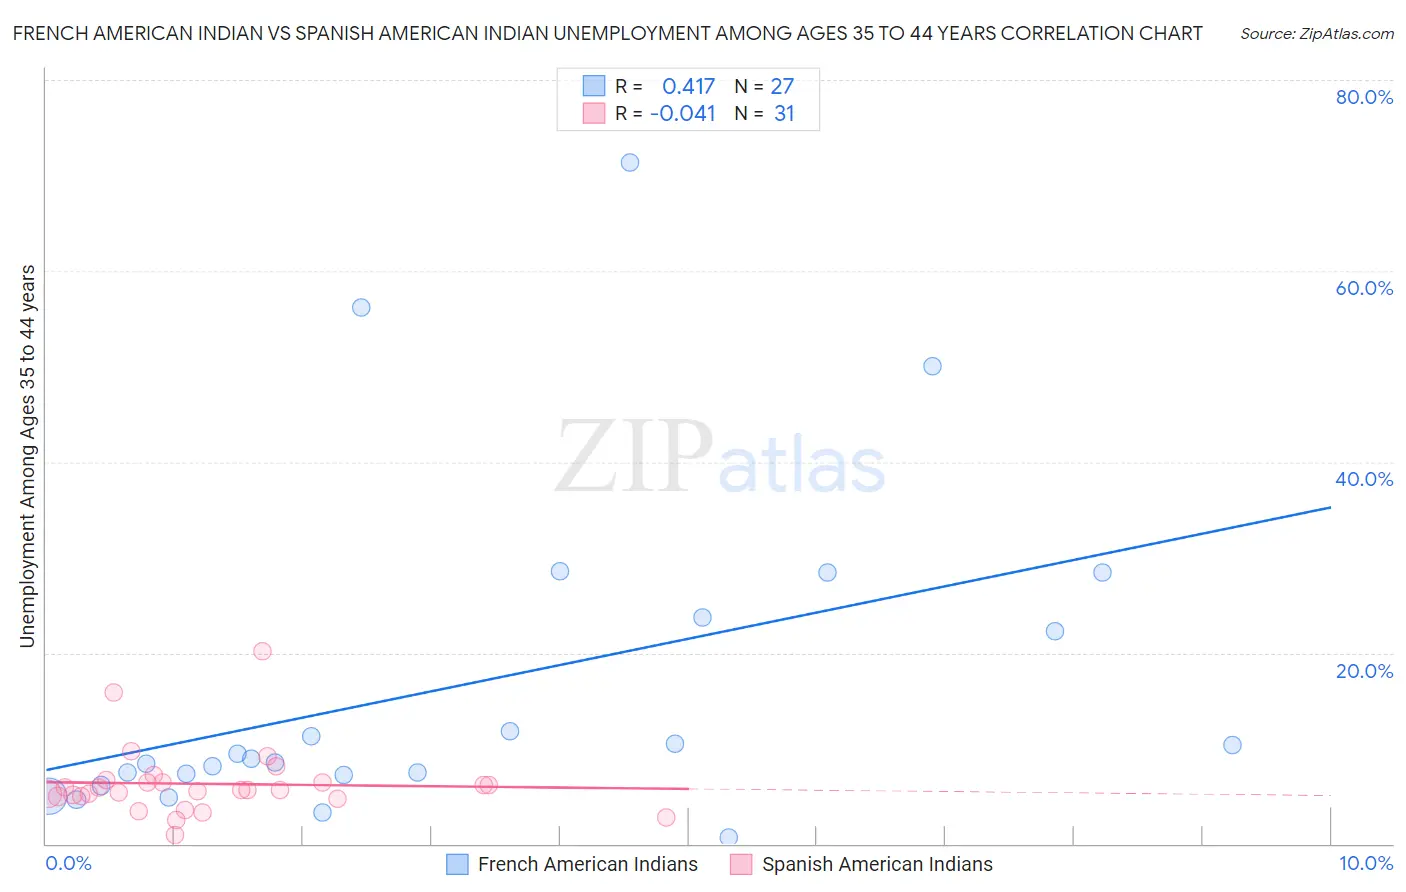 French American Indian vs Spanish American Indian Unemployment Among Ages 35 to 44 years